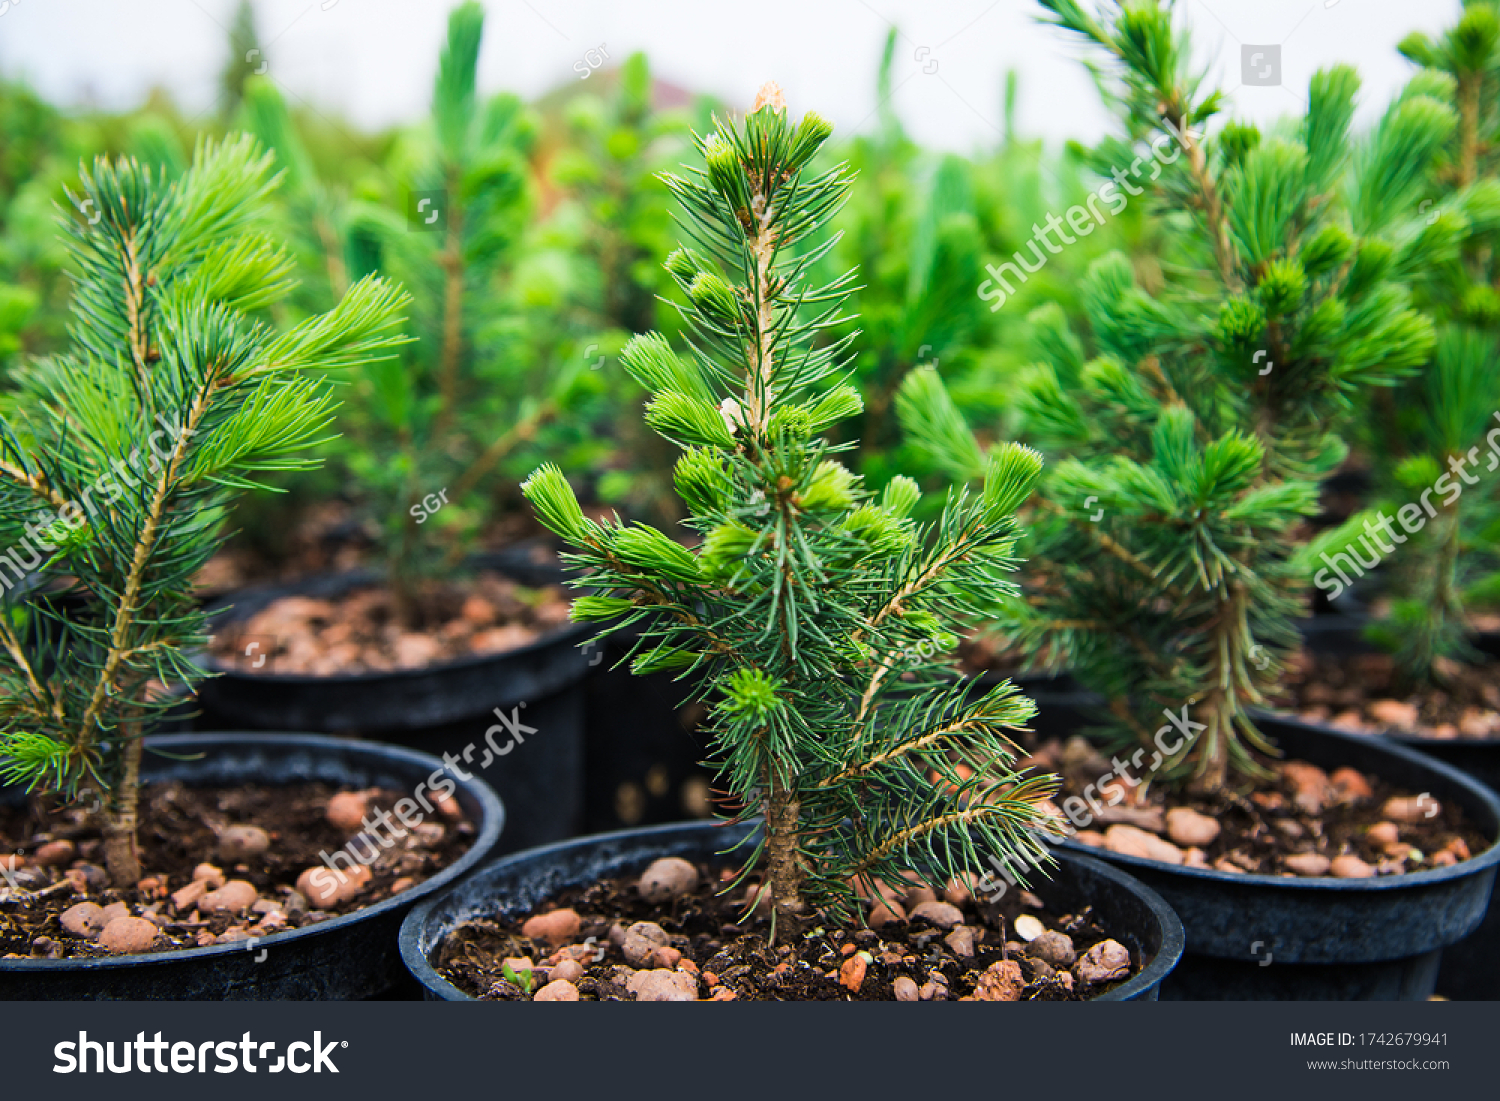 Saplings of pine, spruce, fir and other coniferous trees in pots in plant nursery. #1742679941